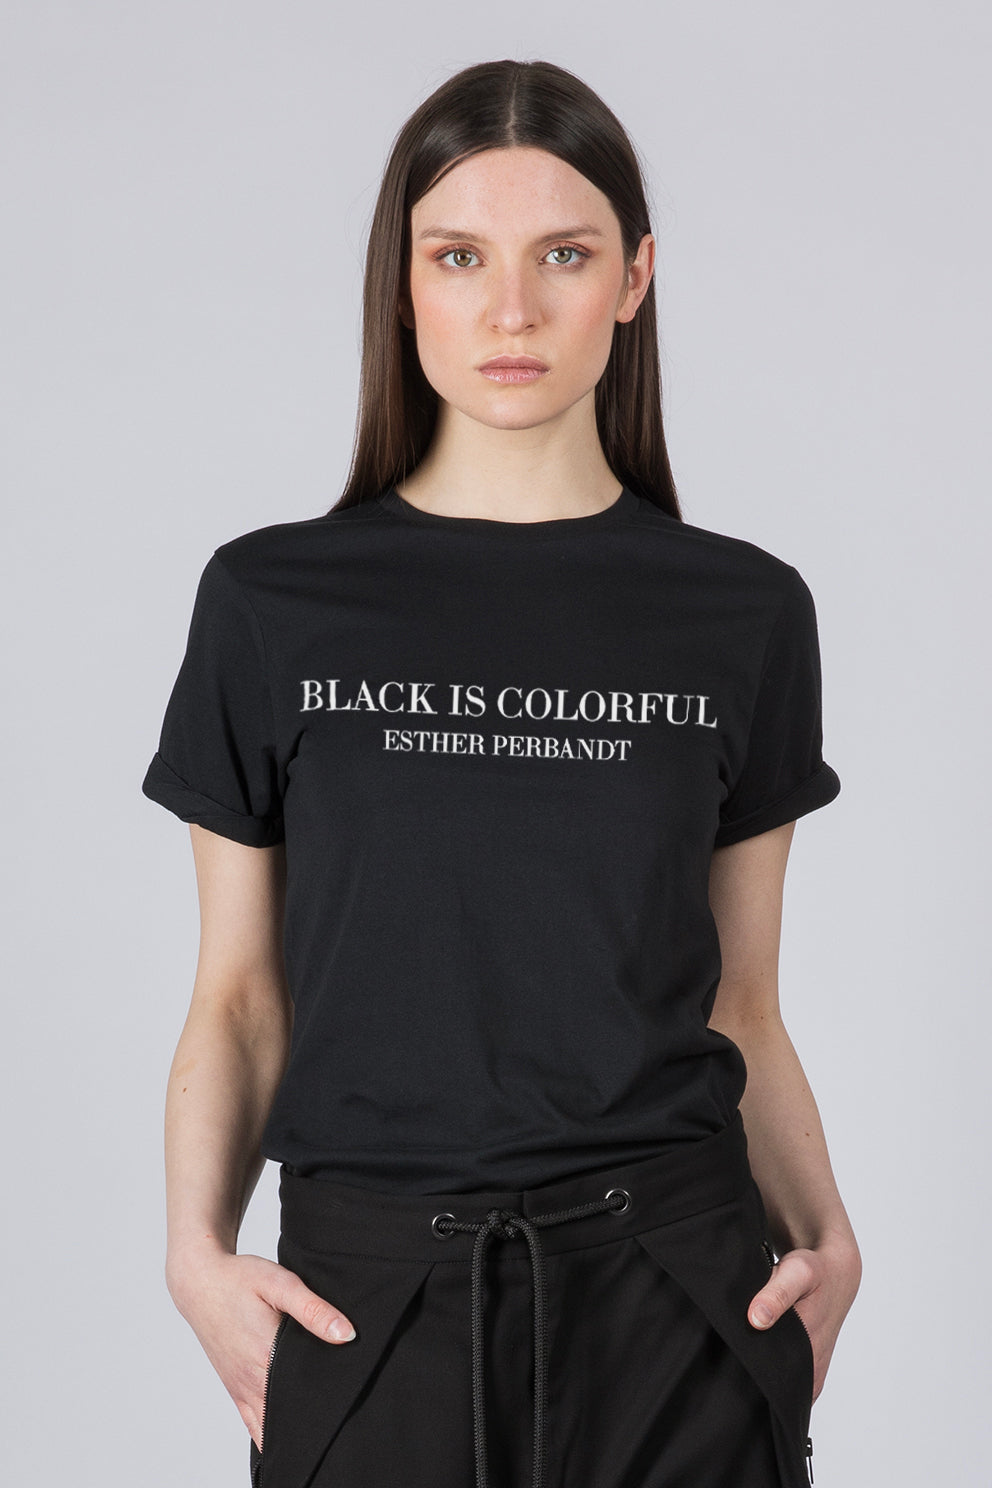 BLACK IS COLORFUL - Statement T-Shirt